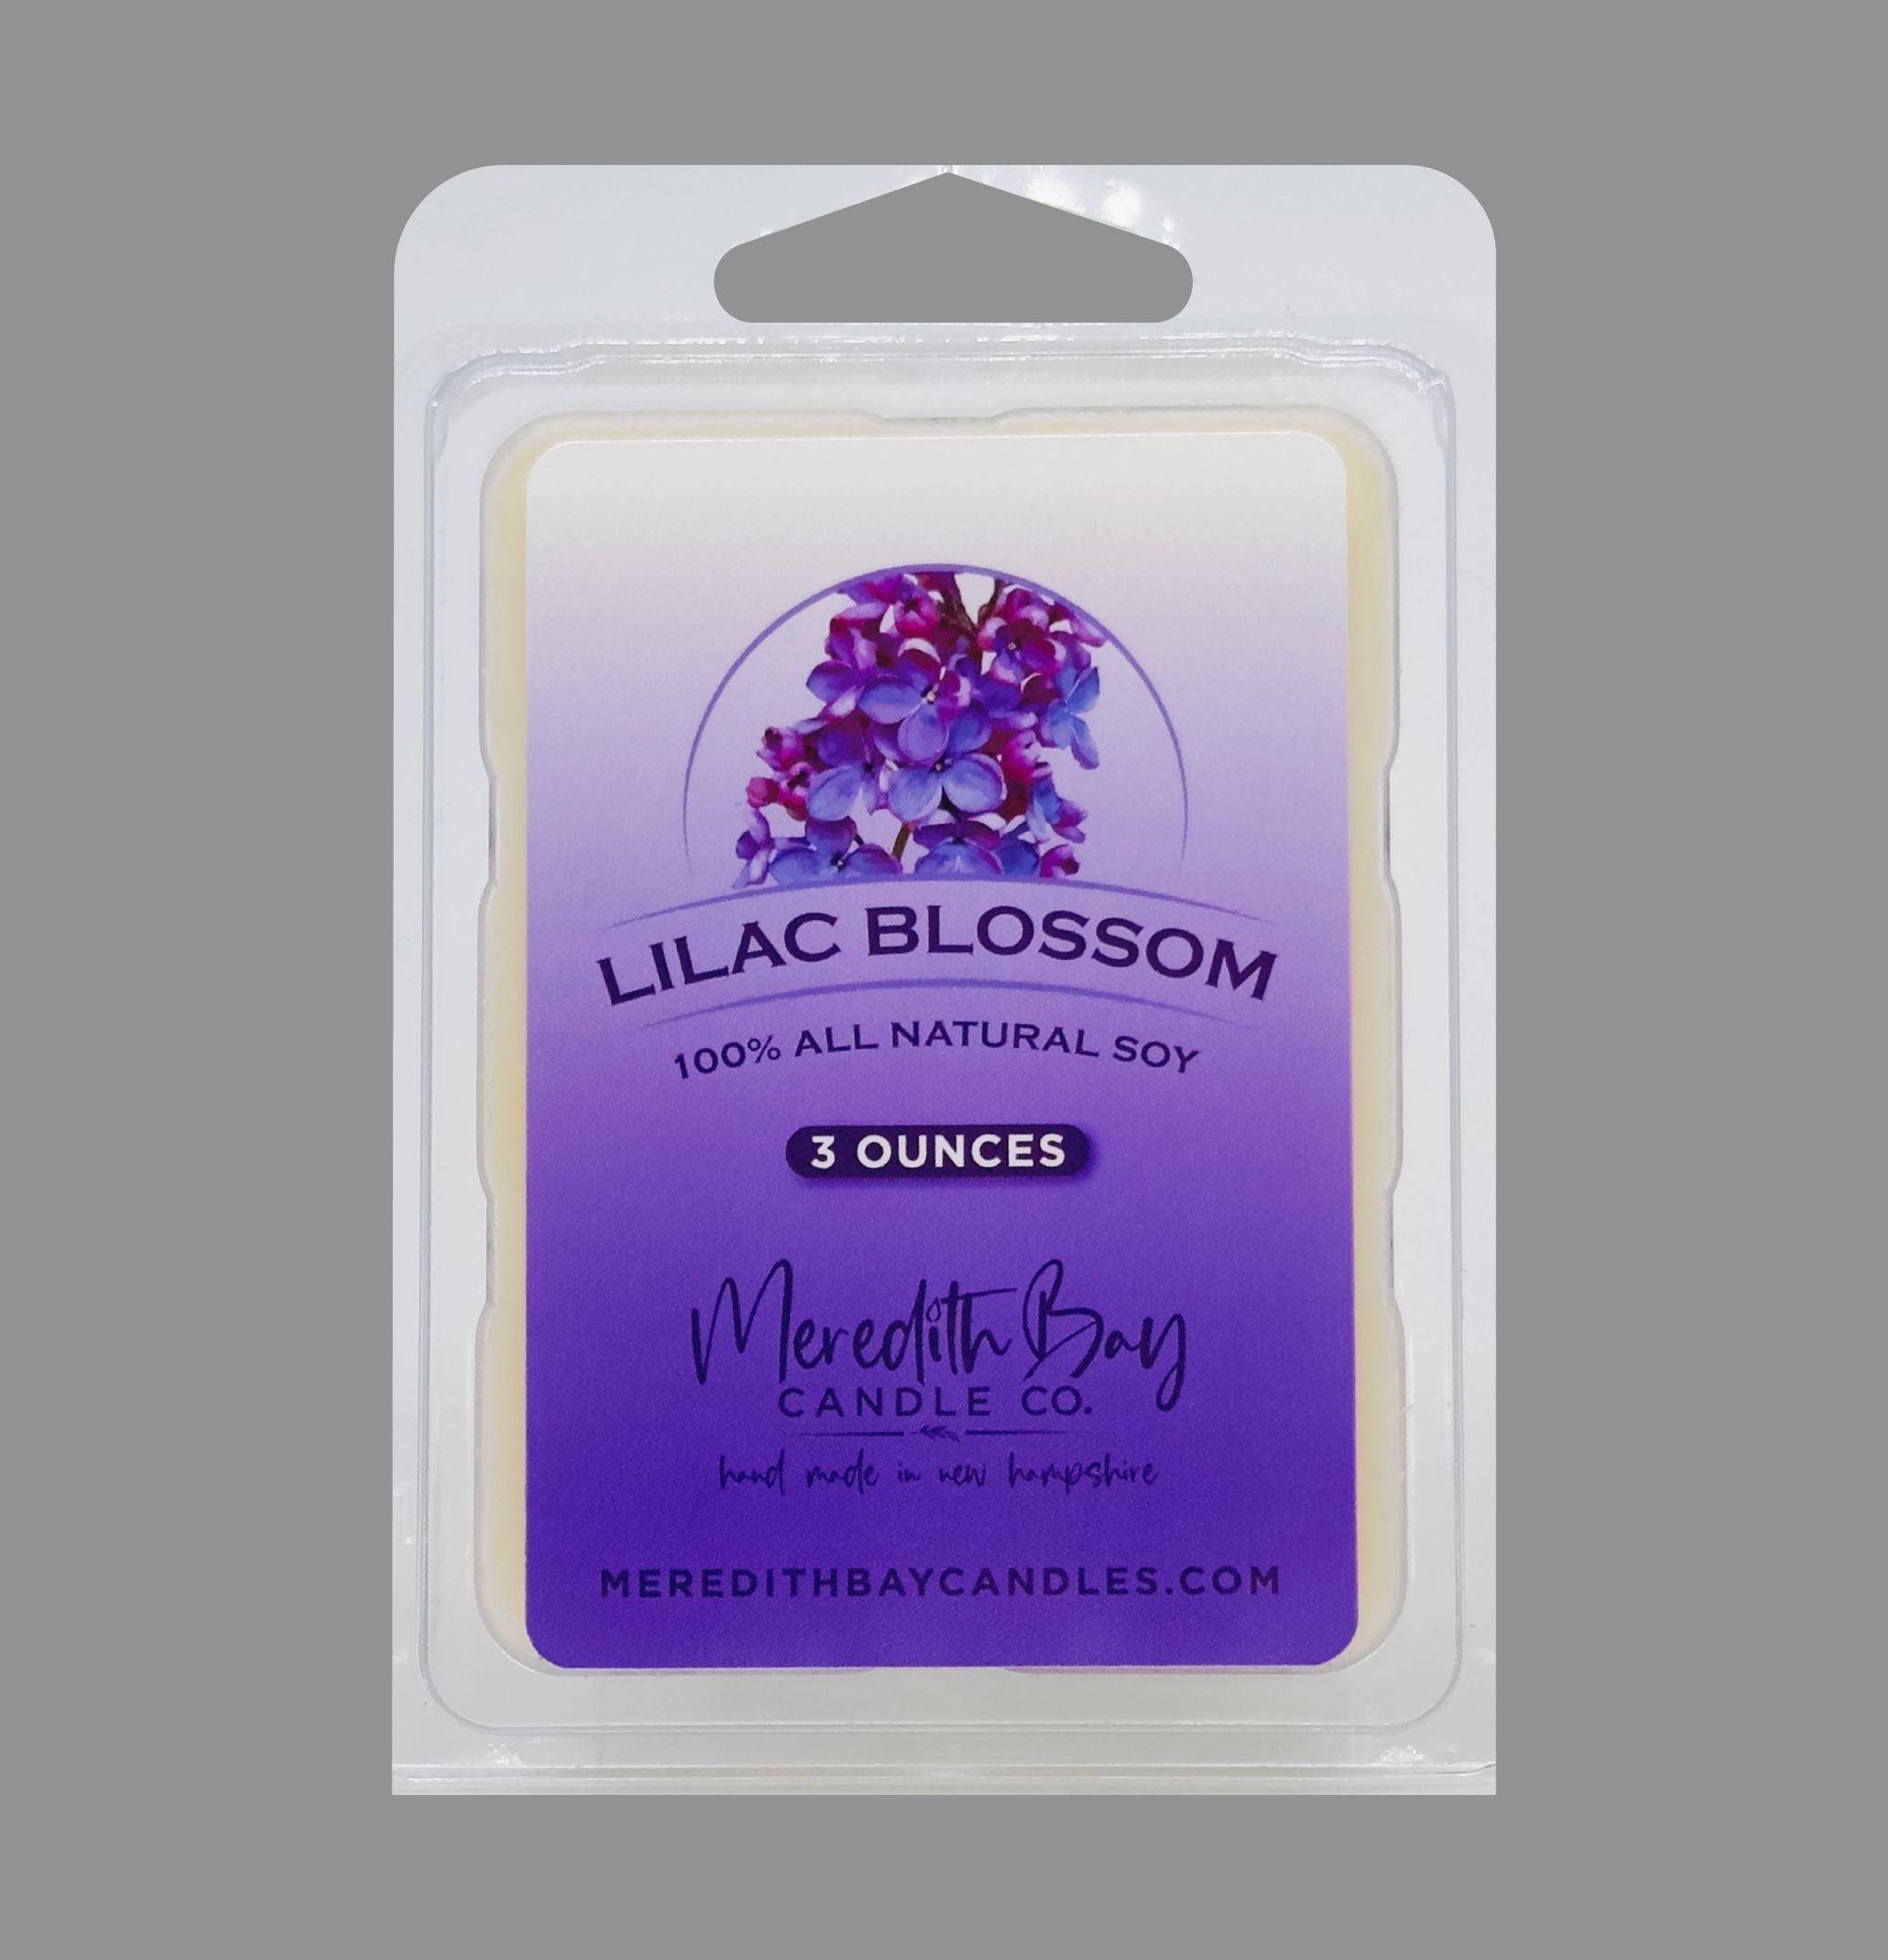 Lilac Blossom Wax Melt Meredith Bay Candle Co 